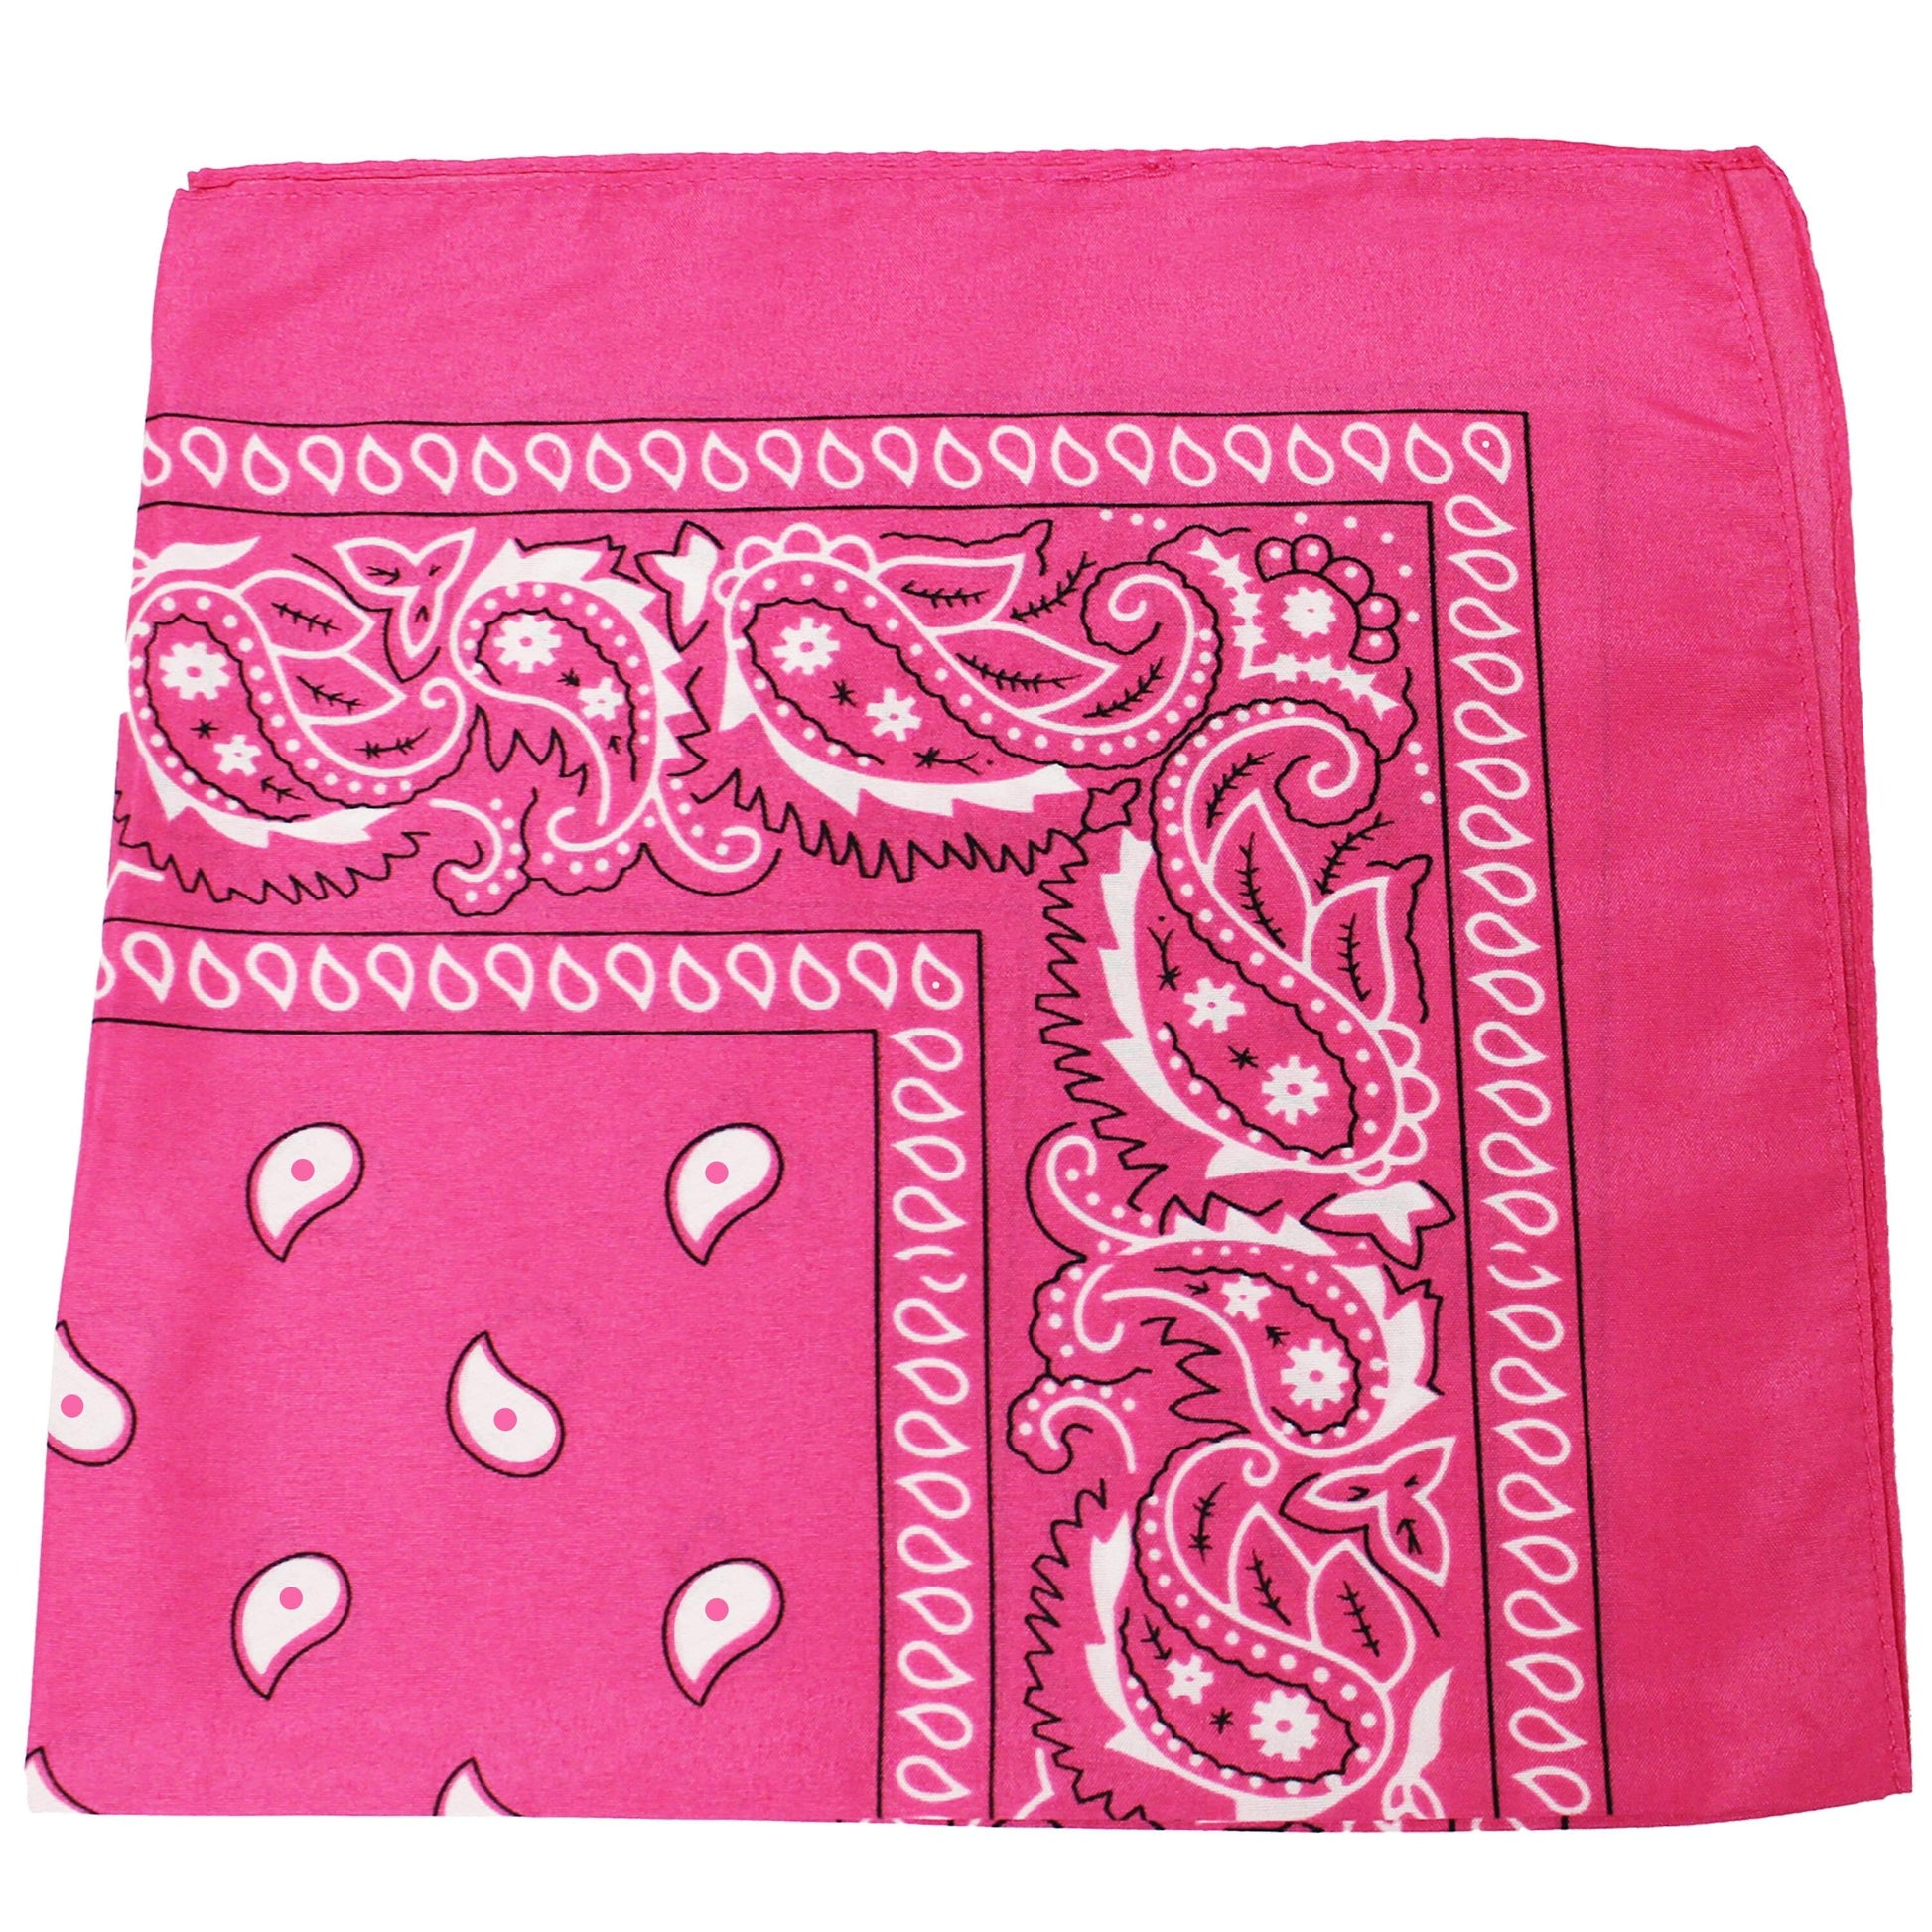 Mechaly Pack of 18 Cotton X-Large Paisley and Plain Printed Bandana